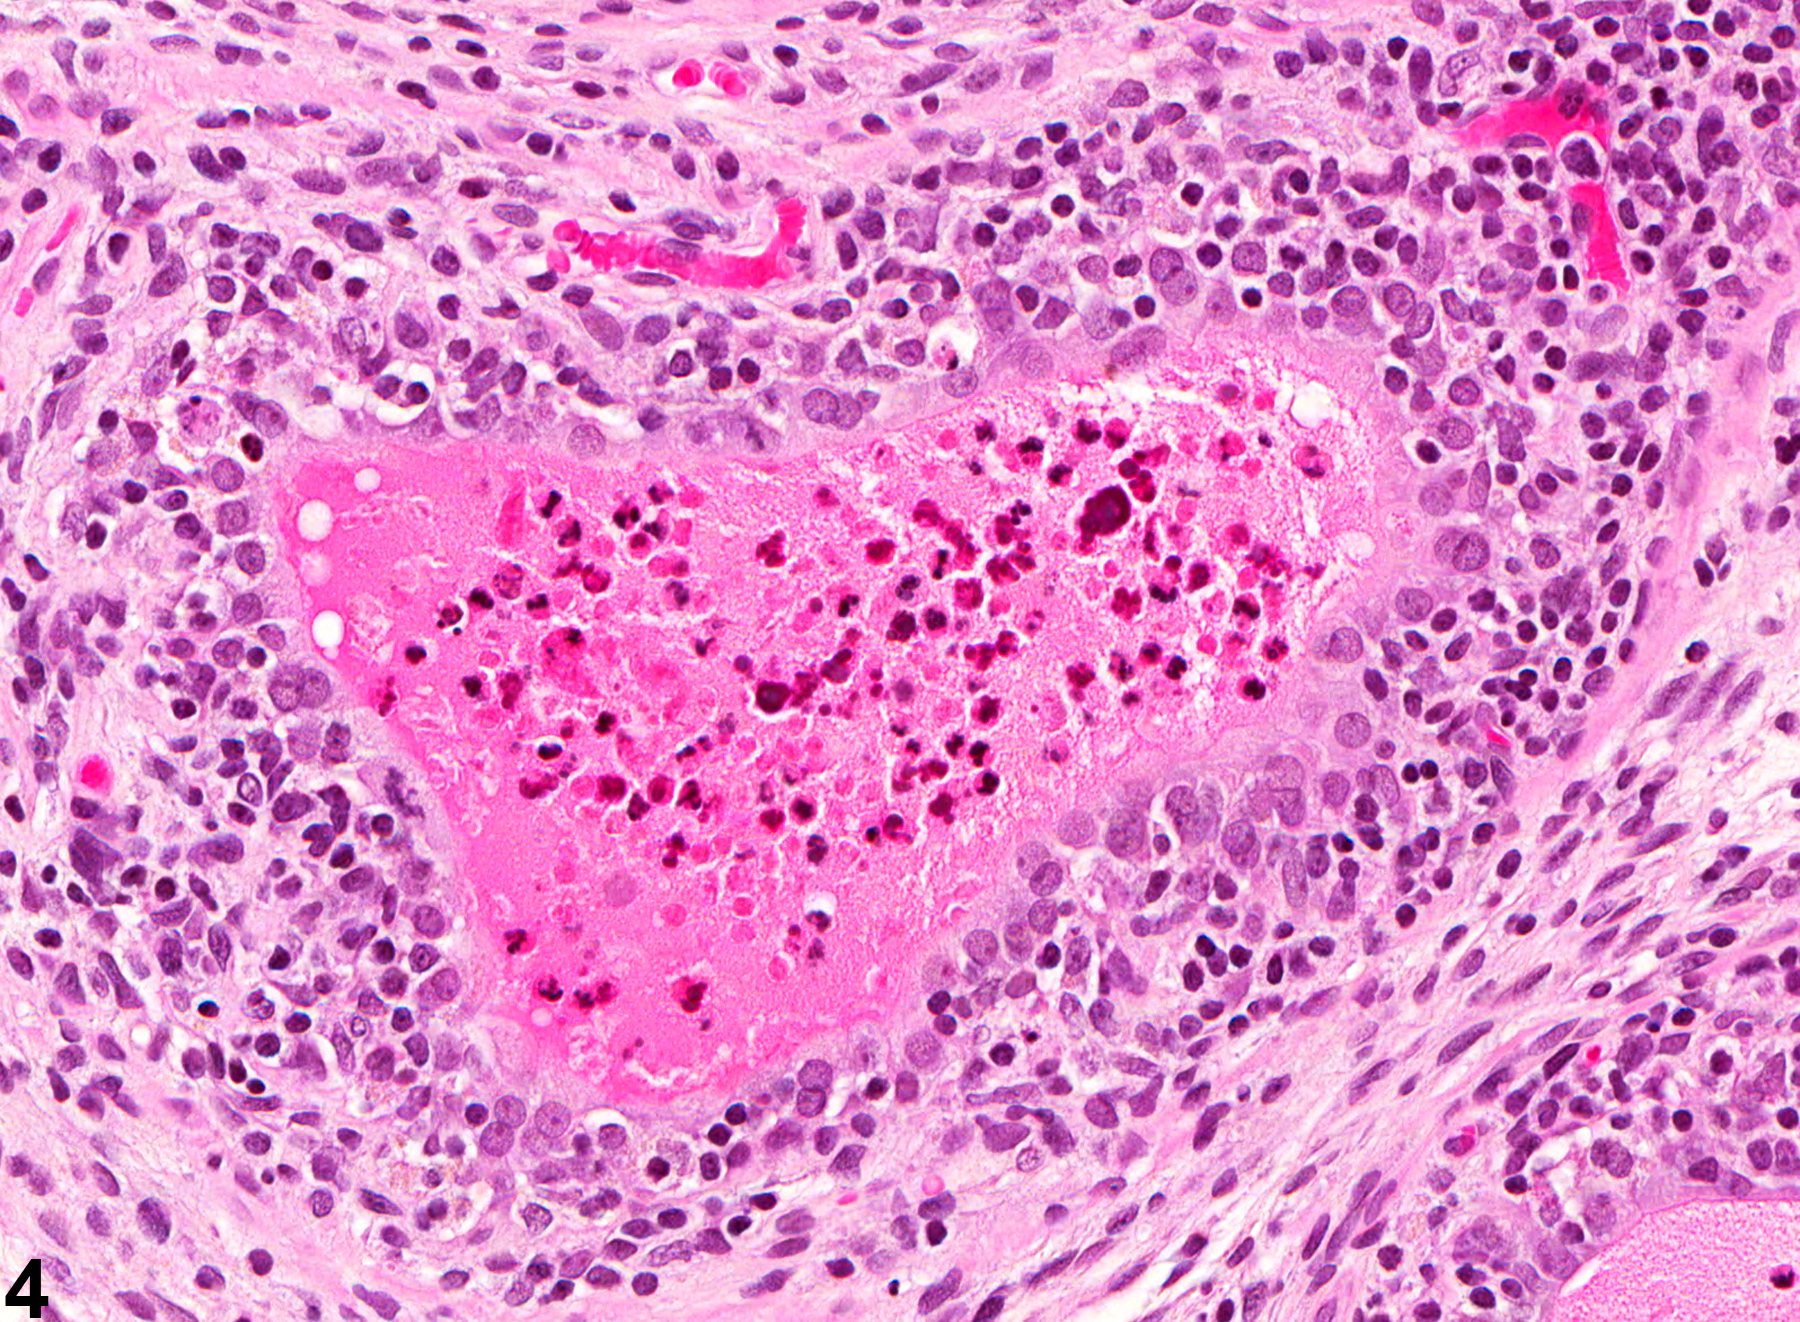 Image of chronic to chronic-active inflammation in the coagulating gland from a male F344/N rat in a chronic study